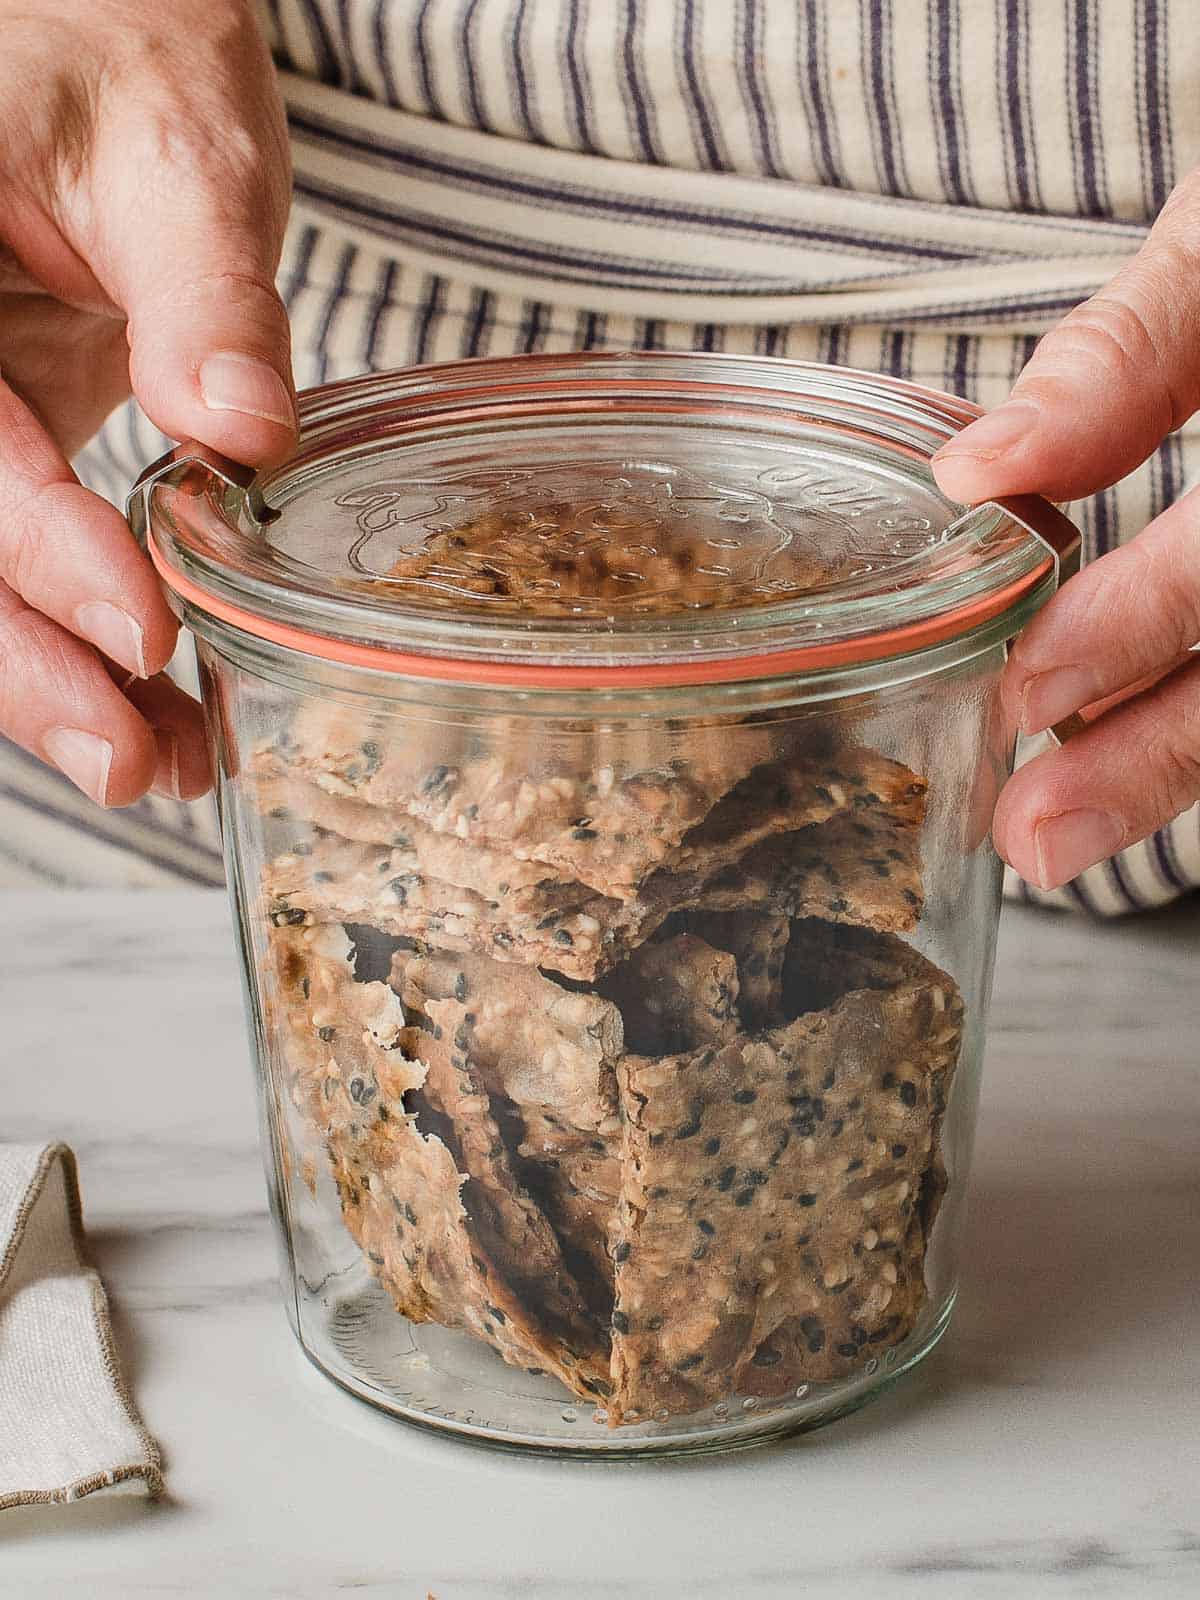 Sourdough seed crackers stored in a glass jar.